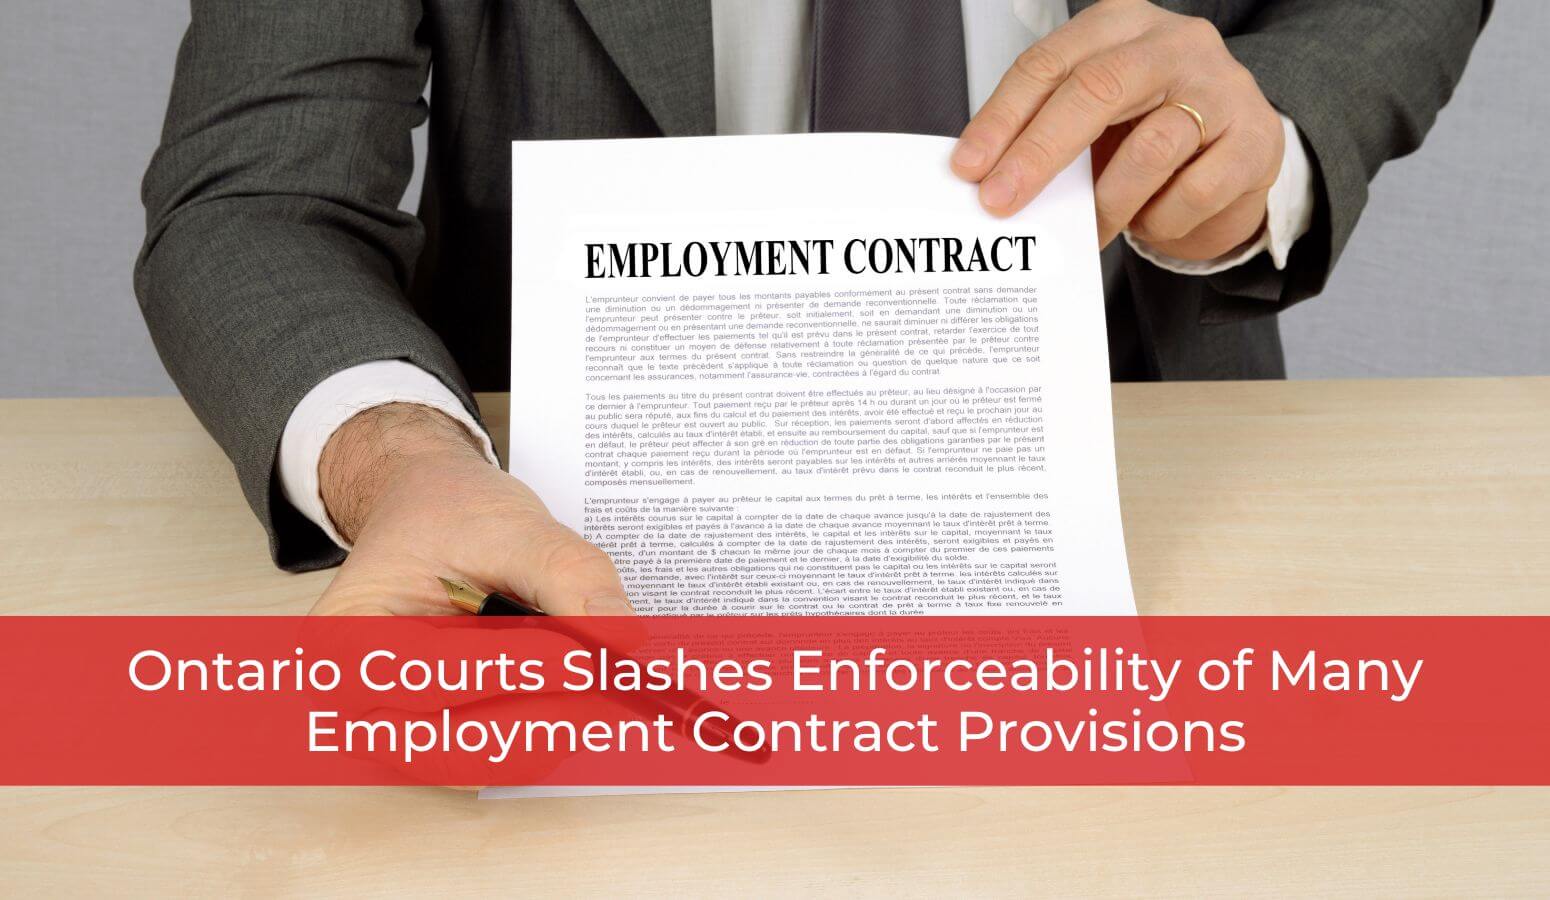 Featured image for “Ontario Courts Slashes Enforceability of Many Employment Contract Provisions”